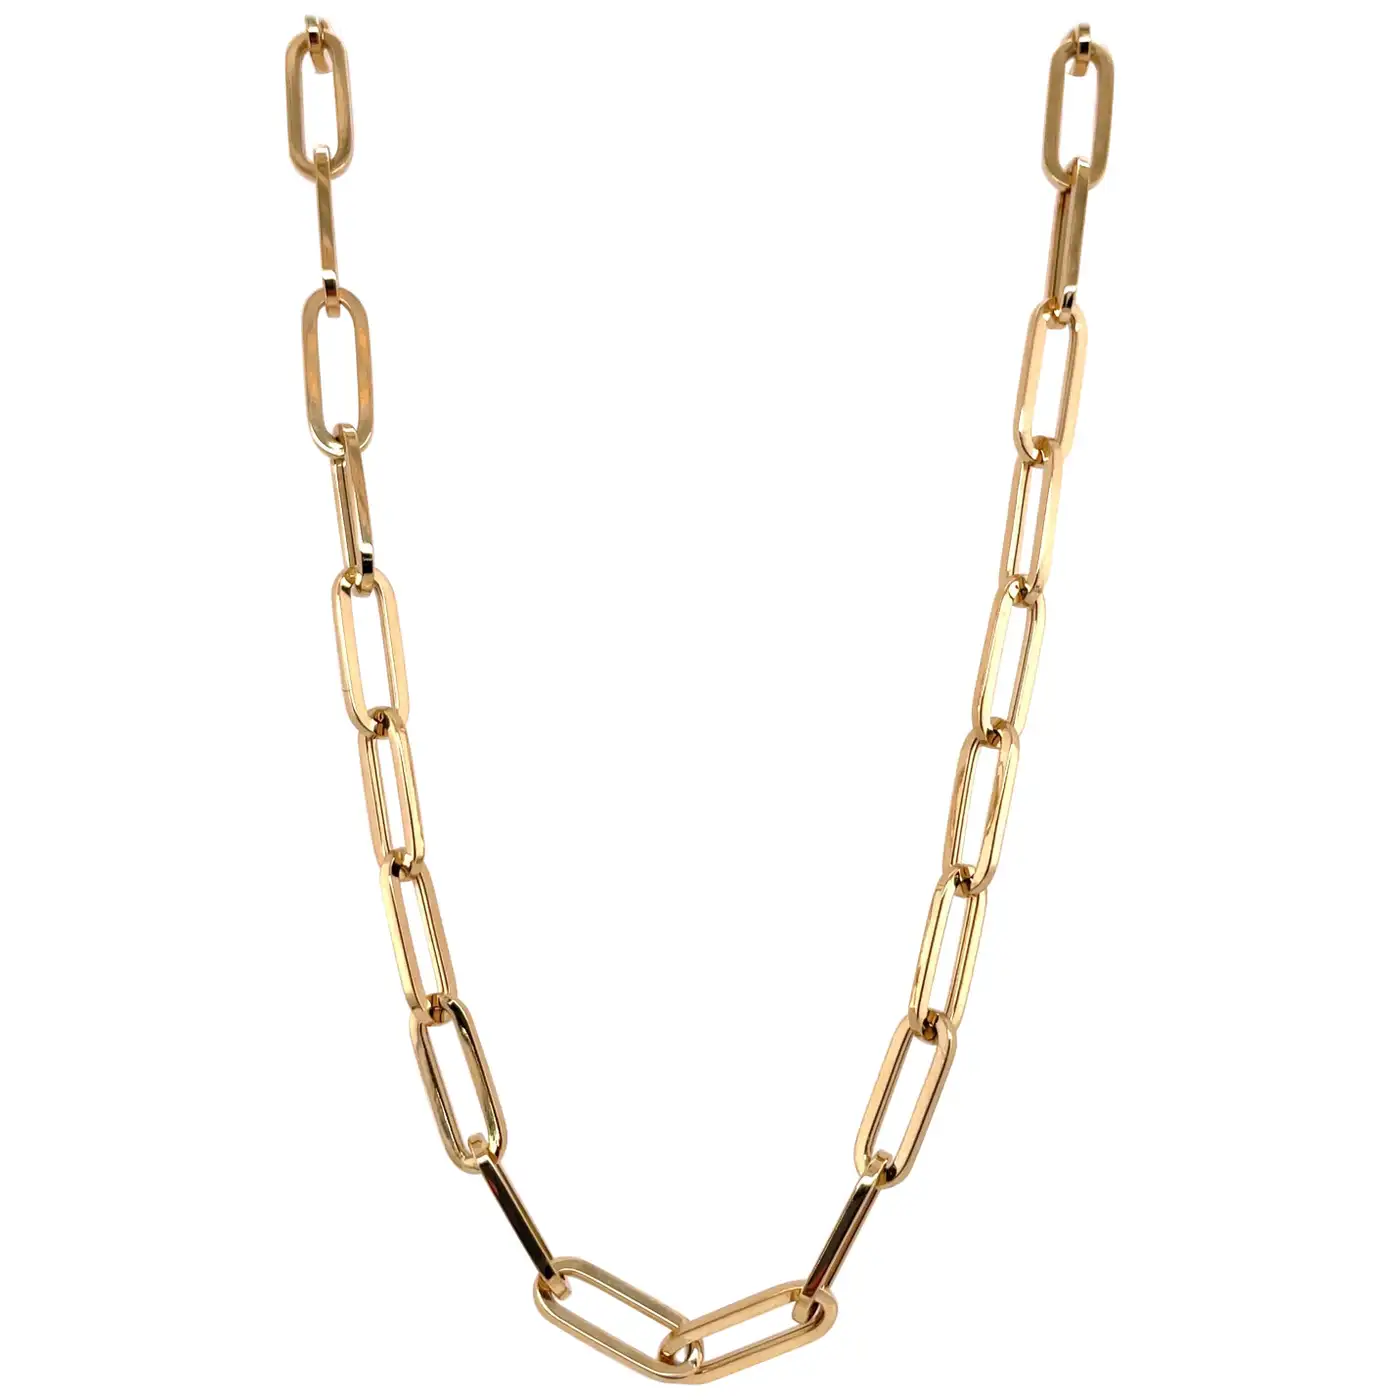 HARBOUR D. Paperclip Link Chain Necklace 14 Karat Yellow Gold